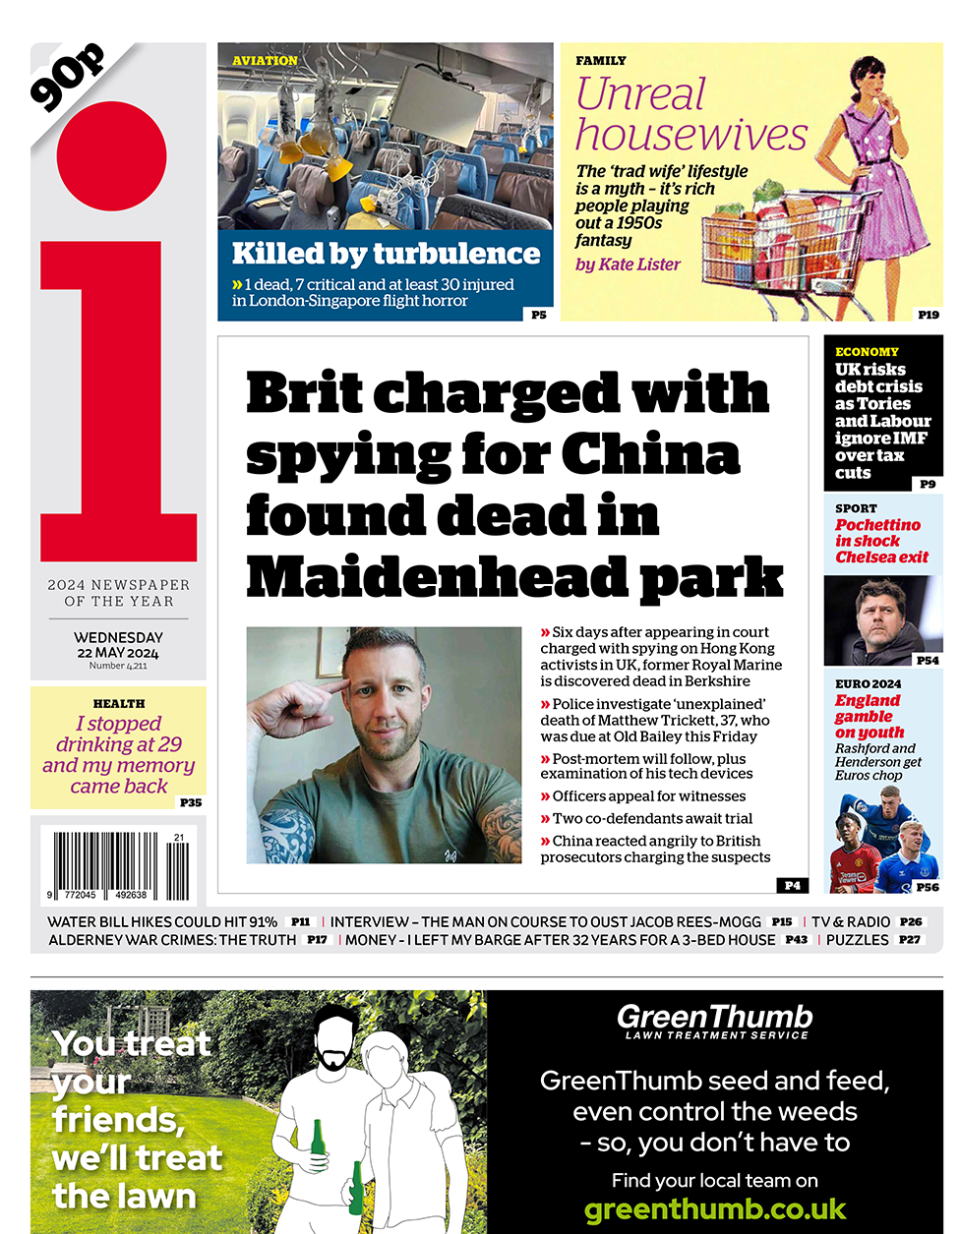 The i headlines "Brit charged with spying for China found dead in Maidenhead park"